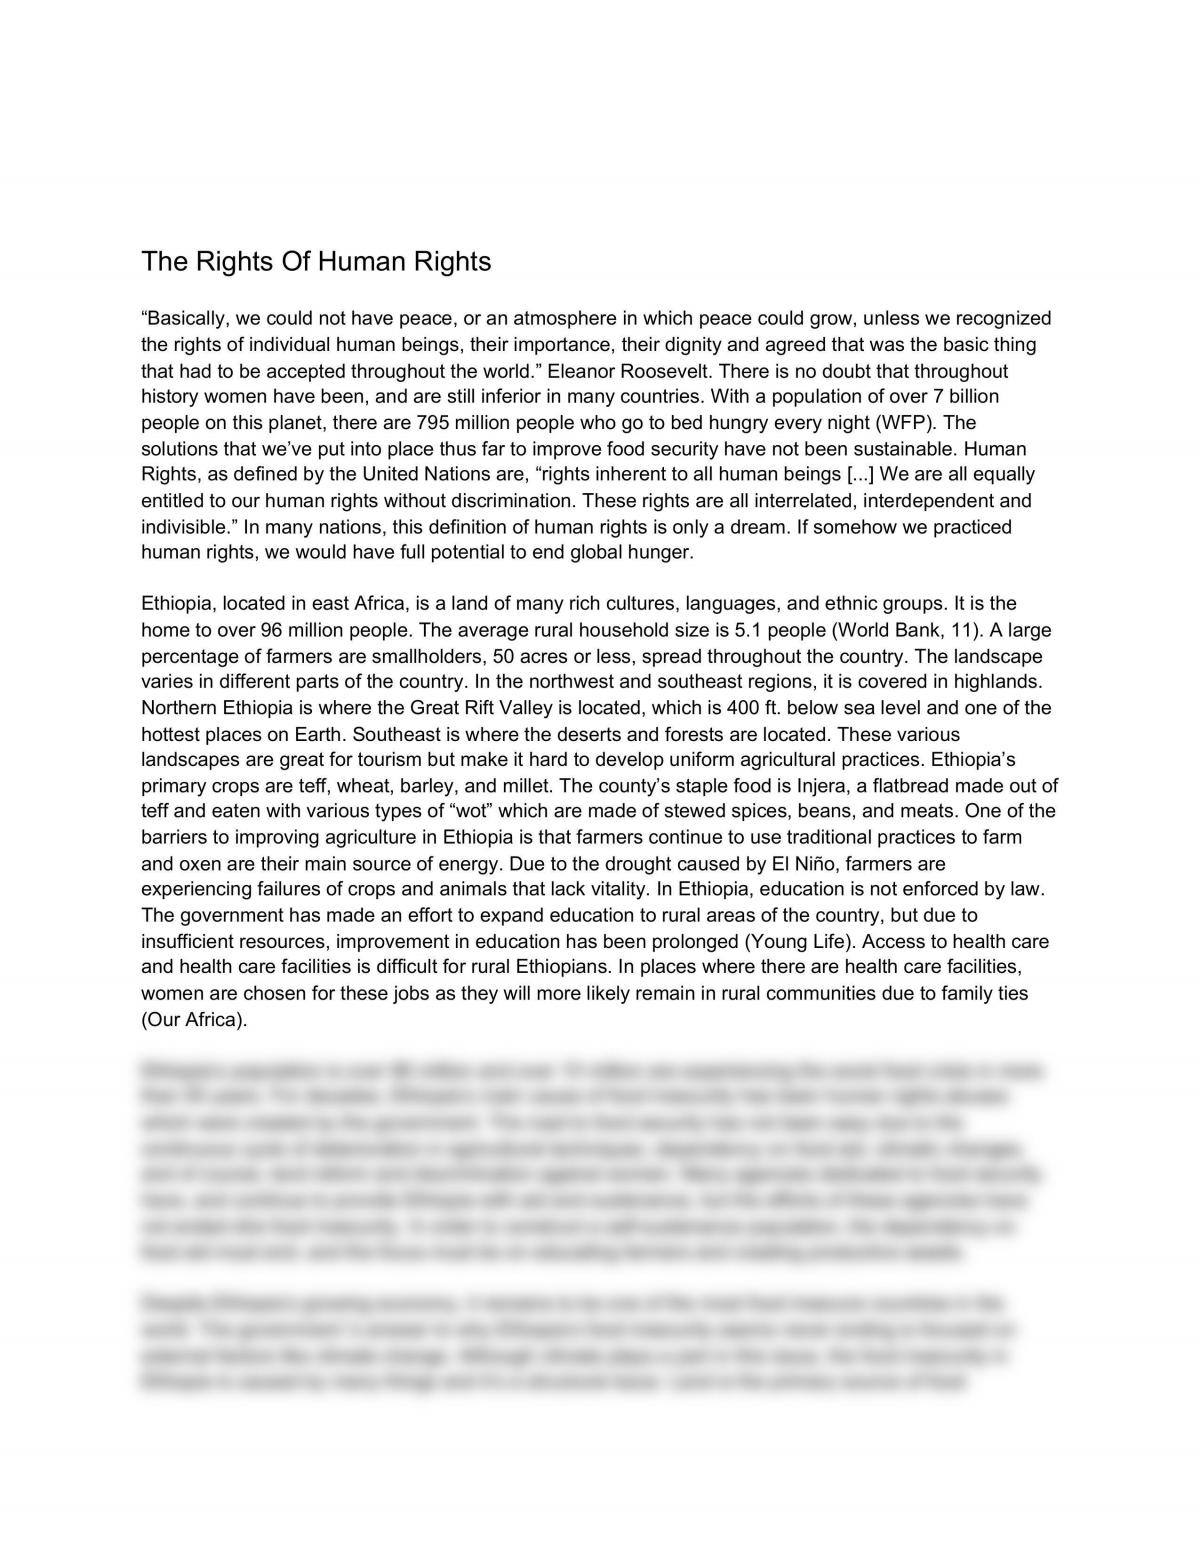 The Rights Of Human Rights - Page 1